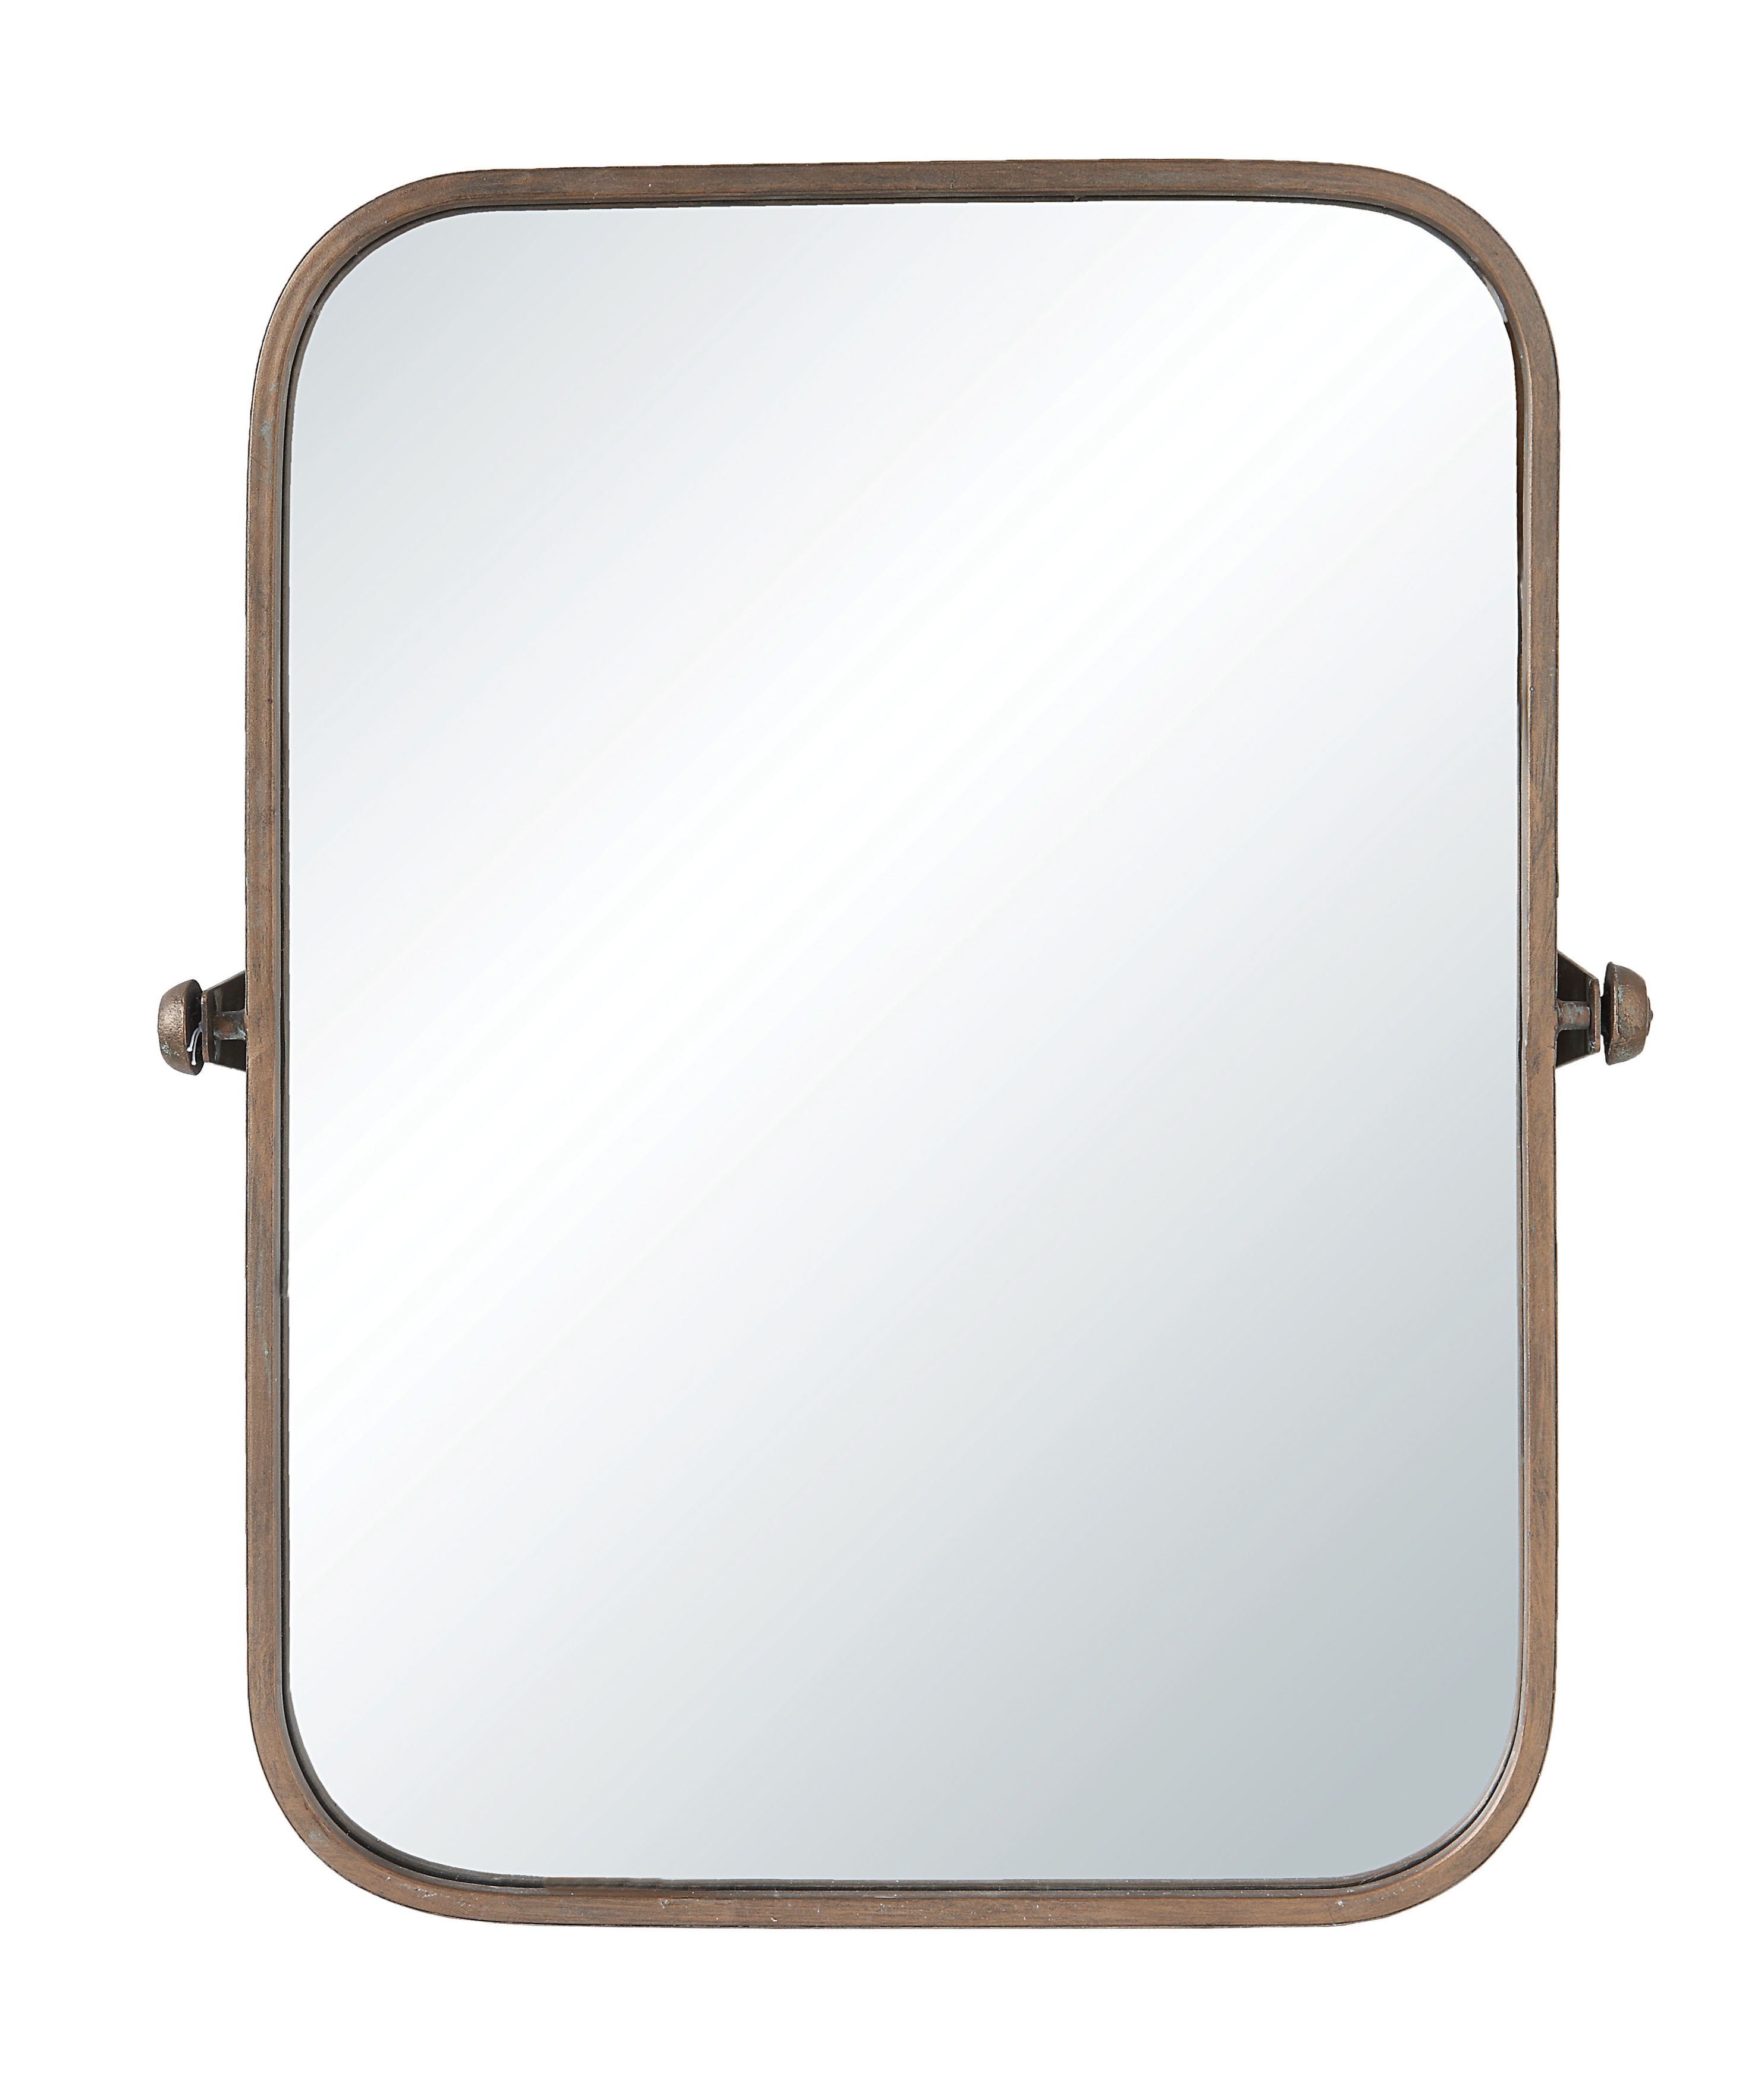 Lavendon And Hanging Wall Mirror Within Well Known Hang Wall Mirrors (View 8 of 20)